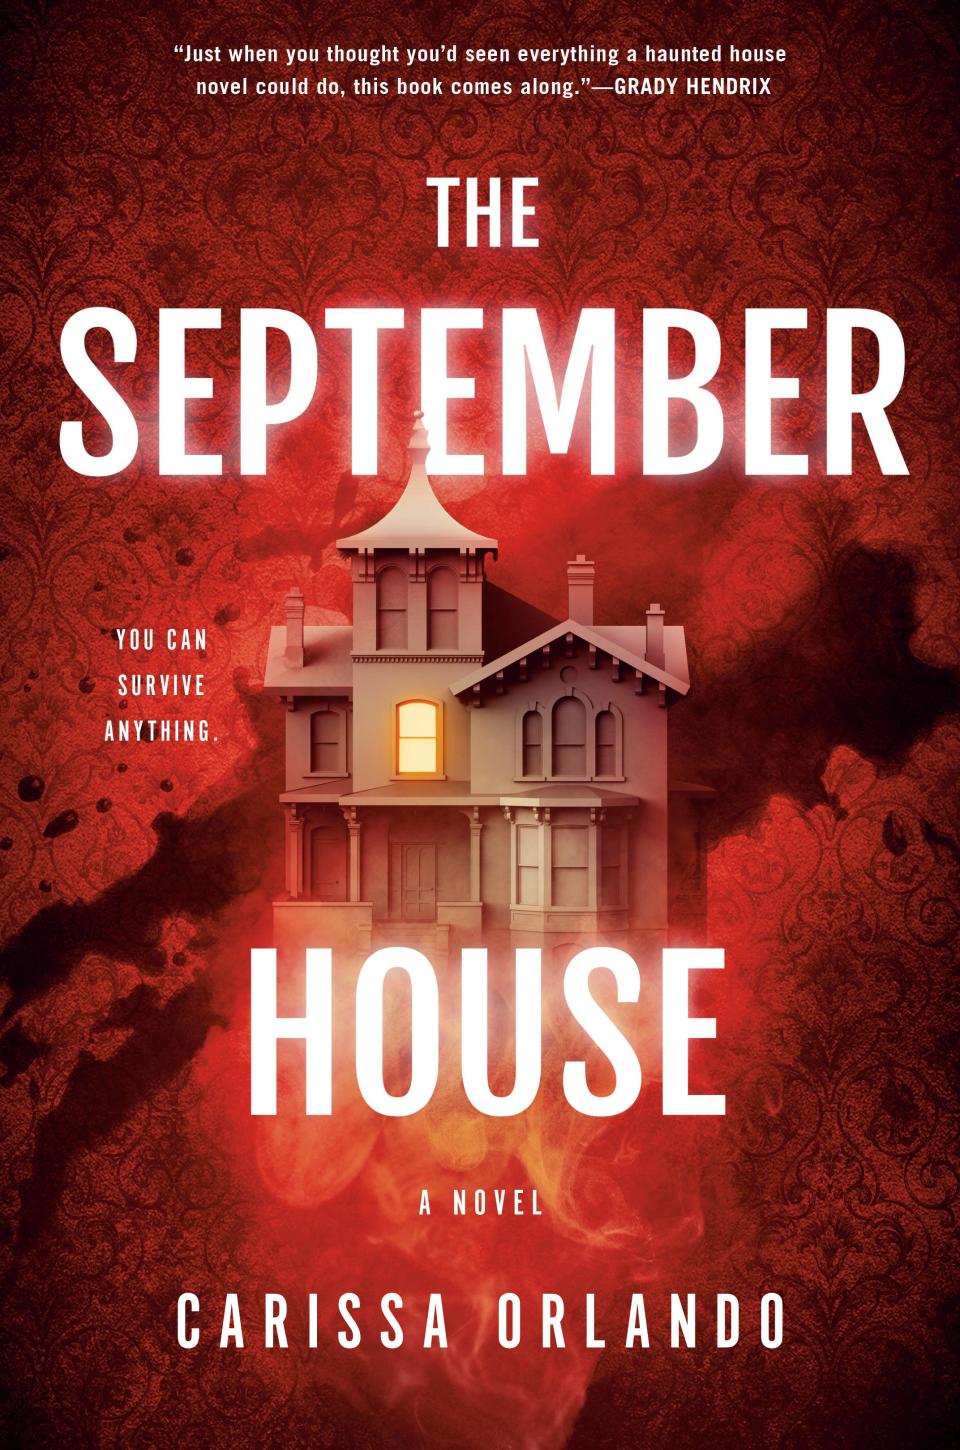 "The September House," by Carissa Orlando.